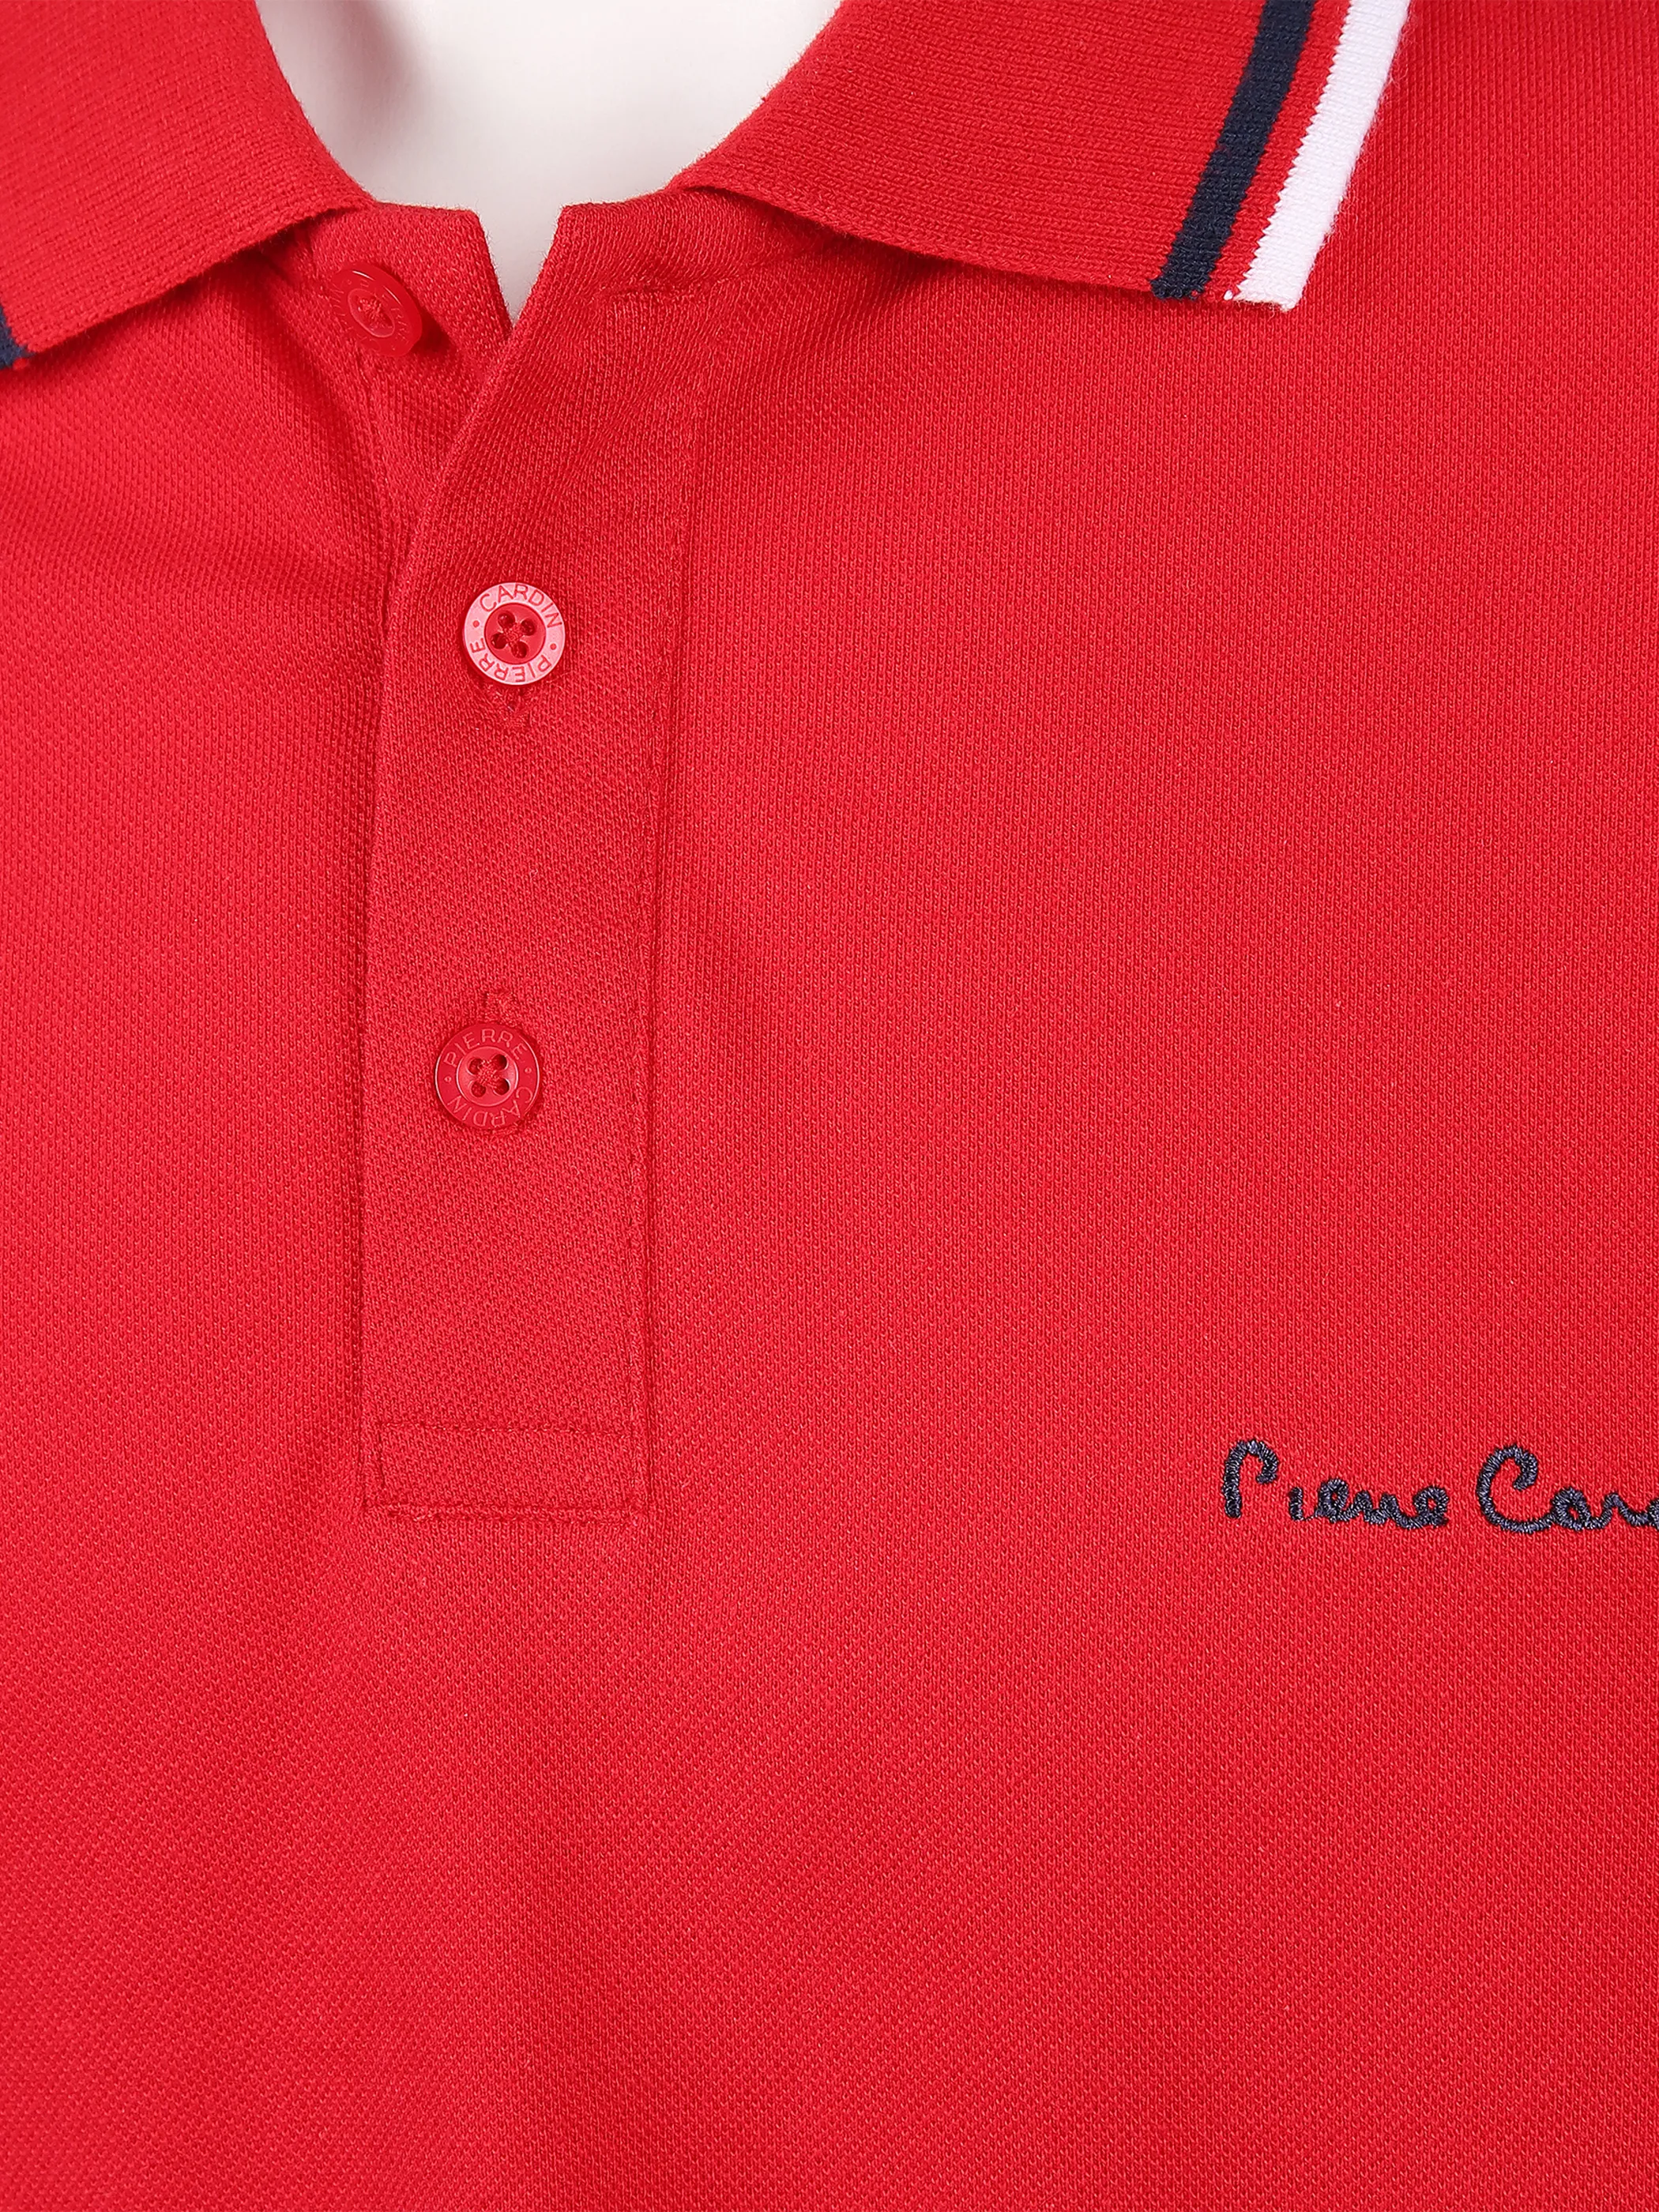 Pierre Cardin He. Poloshirt 1/2 Arm Pierre C Rot 810846 RED 3